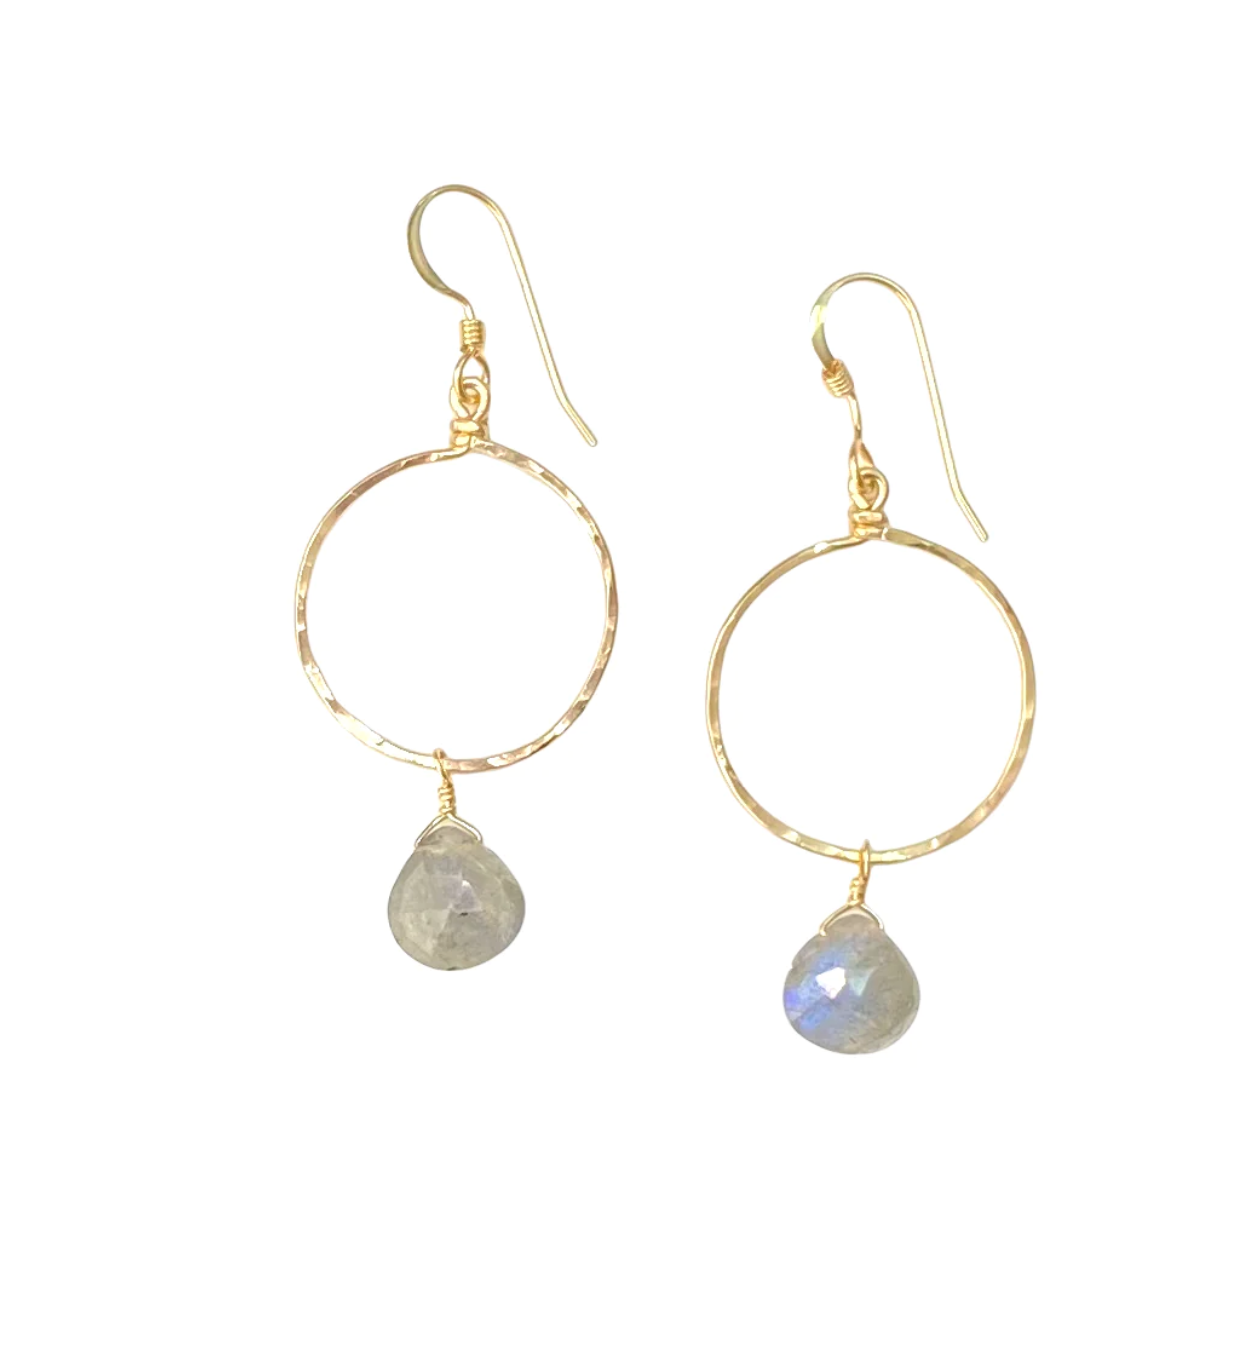 Earrings Eternity Small  14K Gold Fill - Assorted Colors